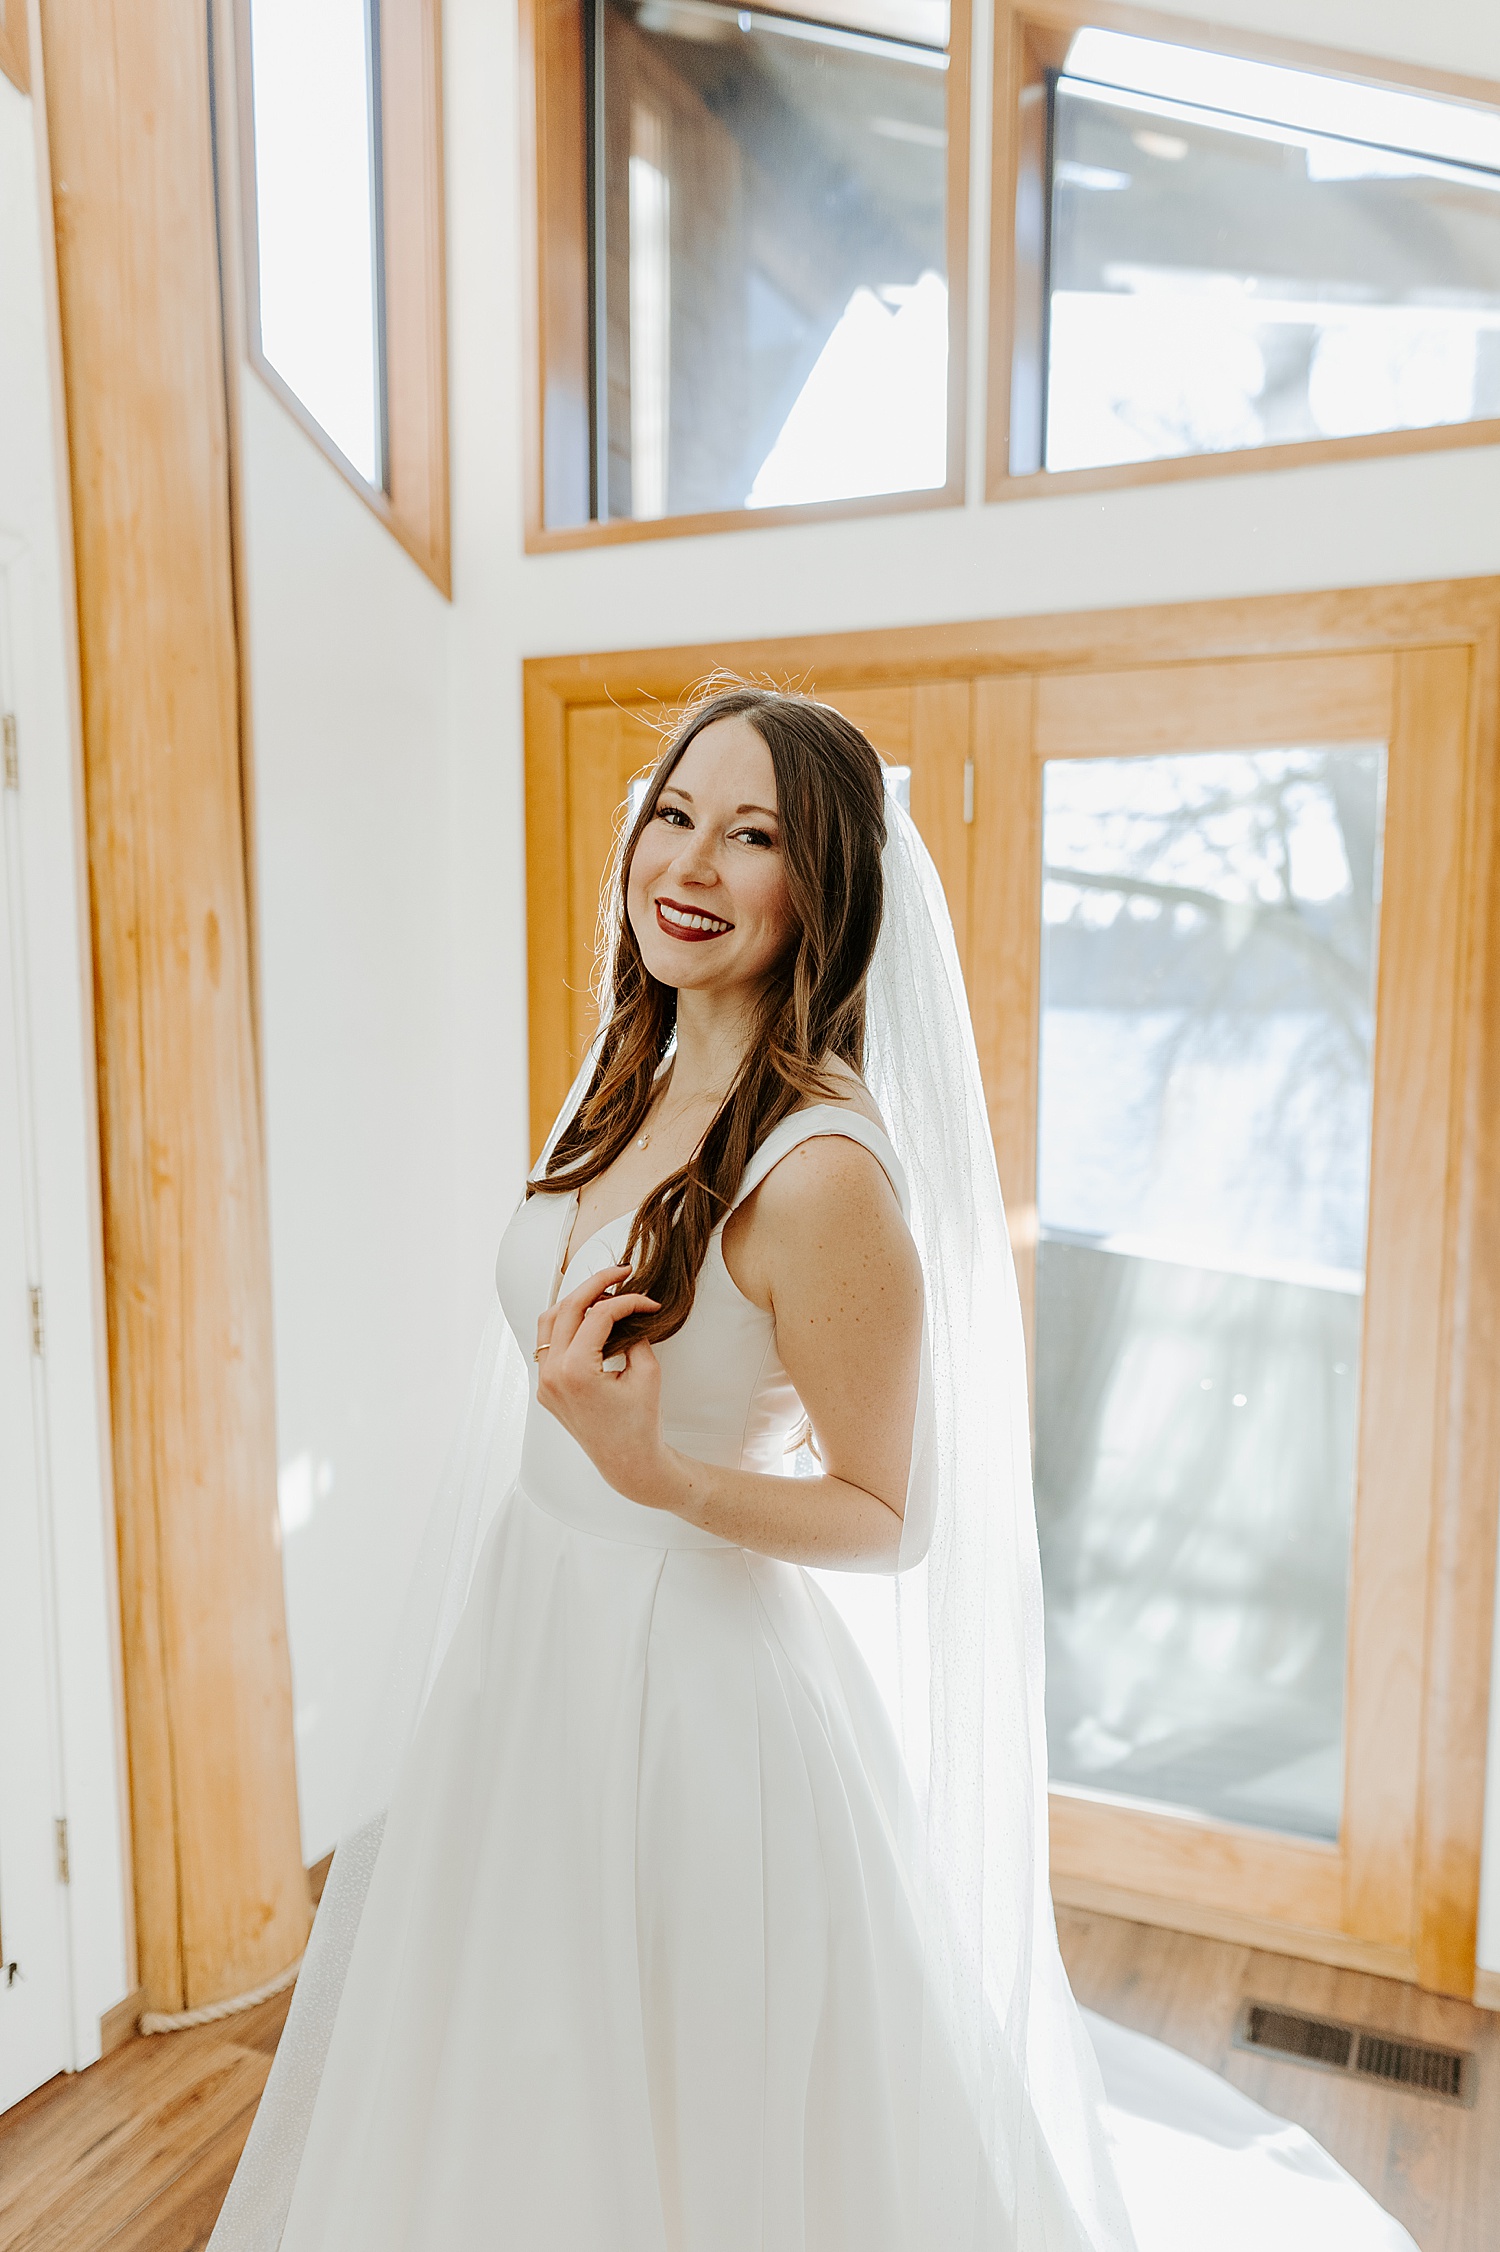 Bride with a ballgown dress and veil